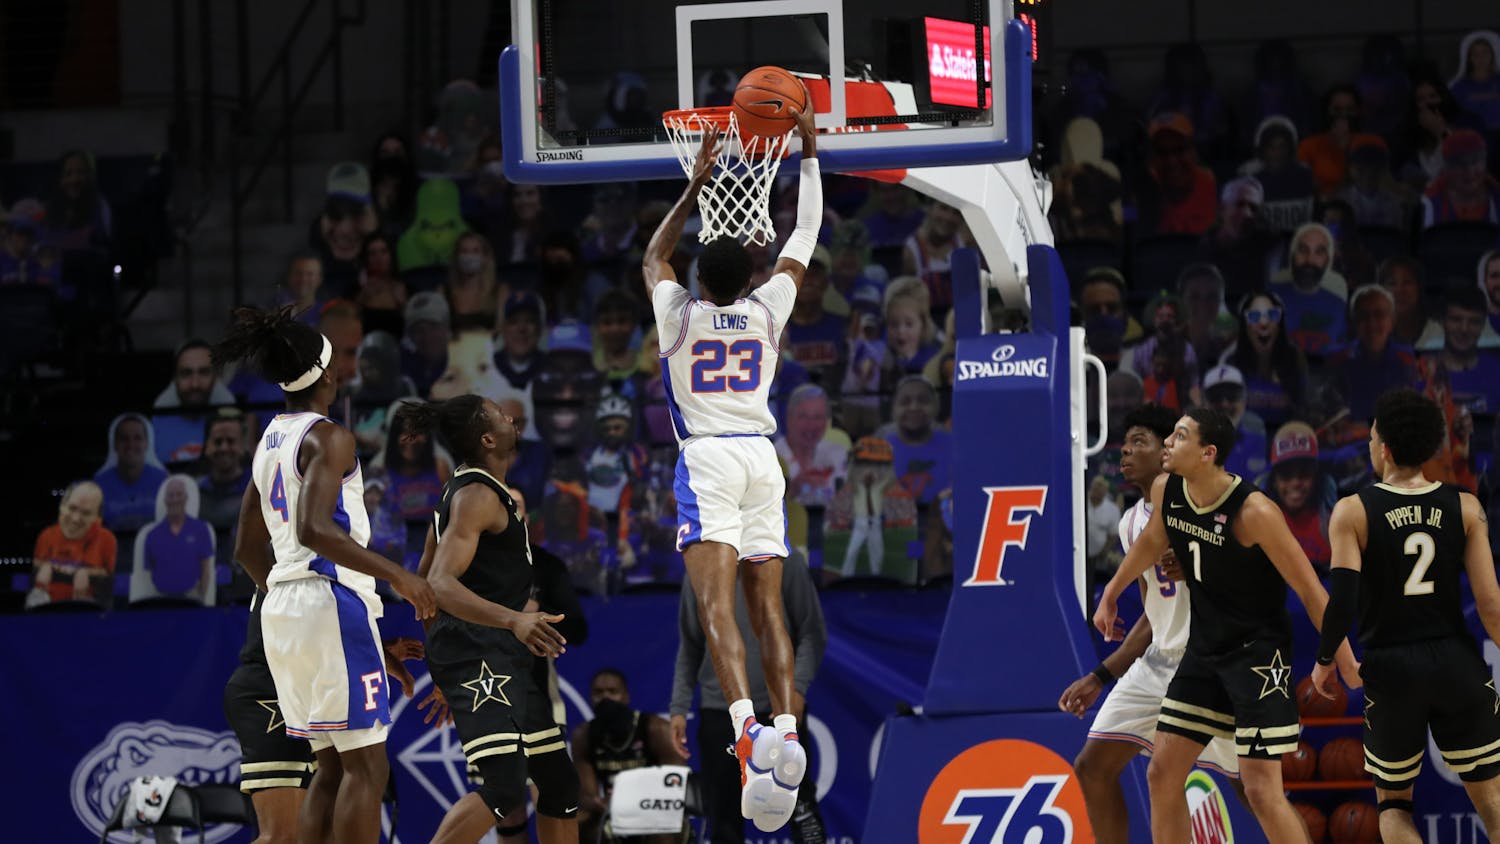 Lewis had missed the past four games due to health and safety protocols but made his mark against Vanderbilt, scoring 10 first-half points. Photo Courtesy of the SEC Media Portal.